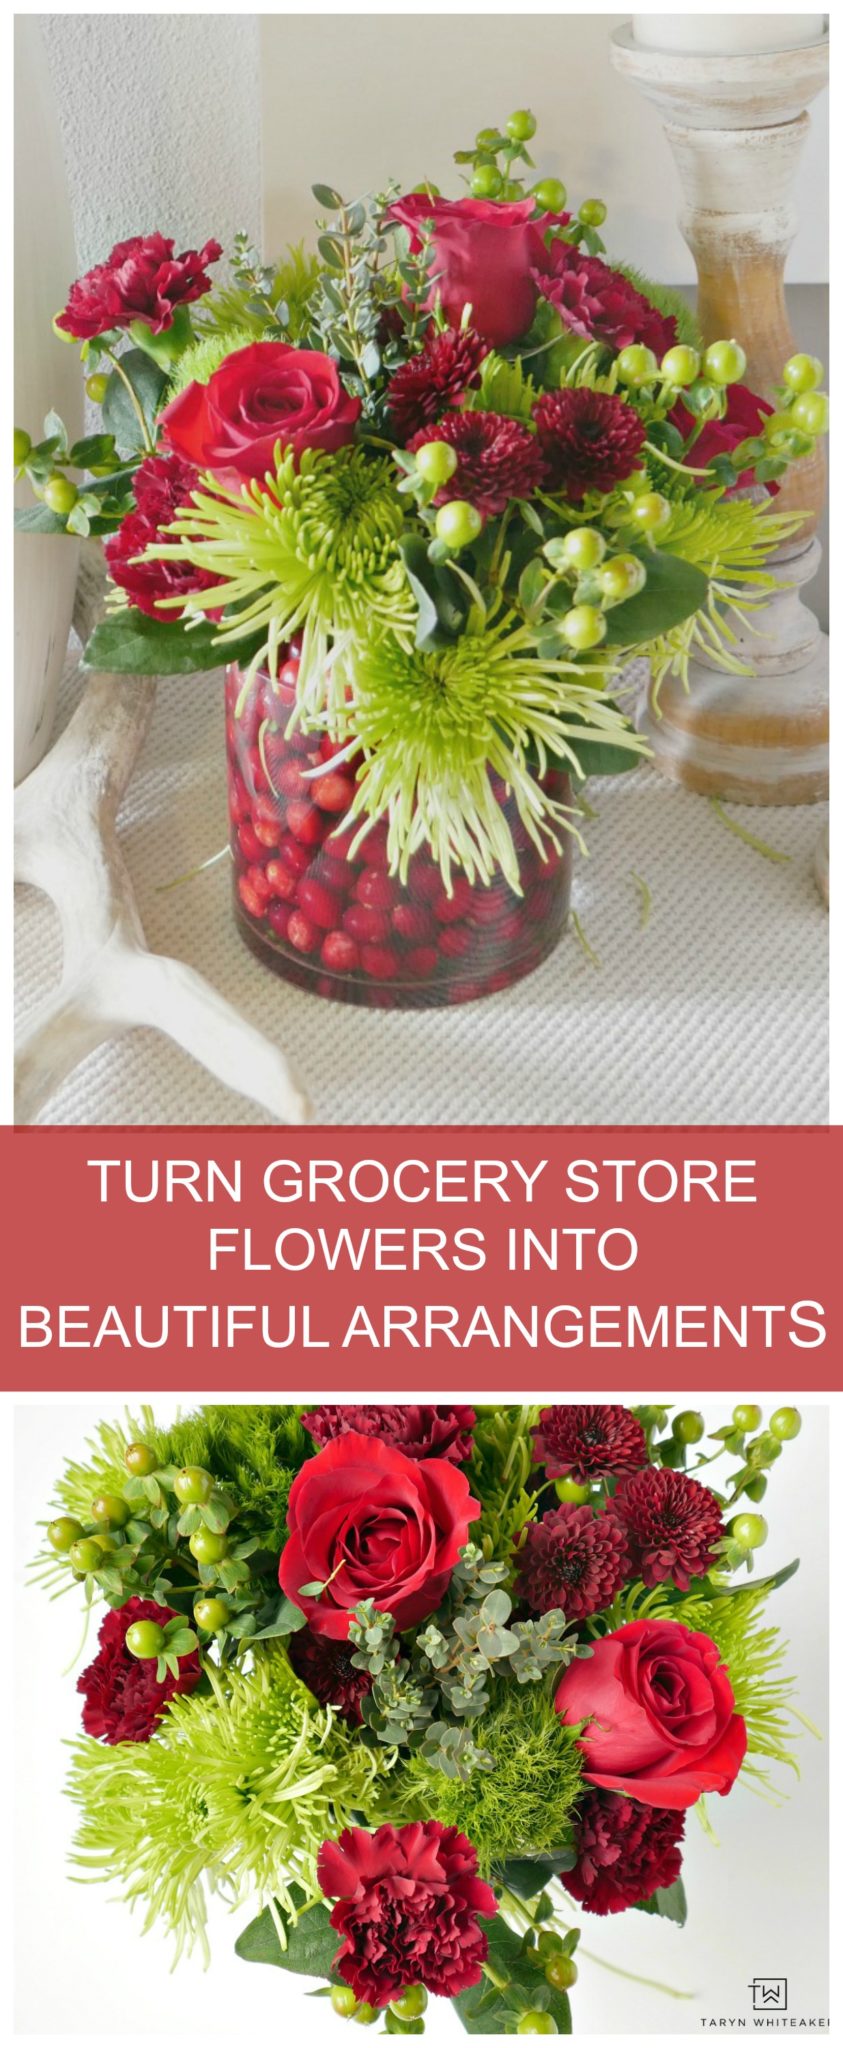 Grab a $10 bouquet of flowers at the grocery store and create your own stunning floral piece. Here are a few Tips for Arranging Grocery Store Flowers!